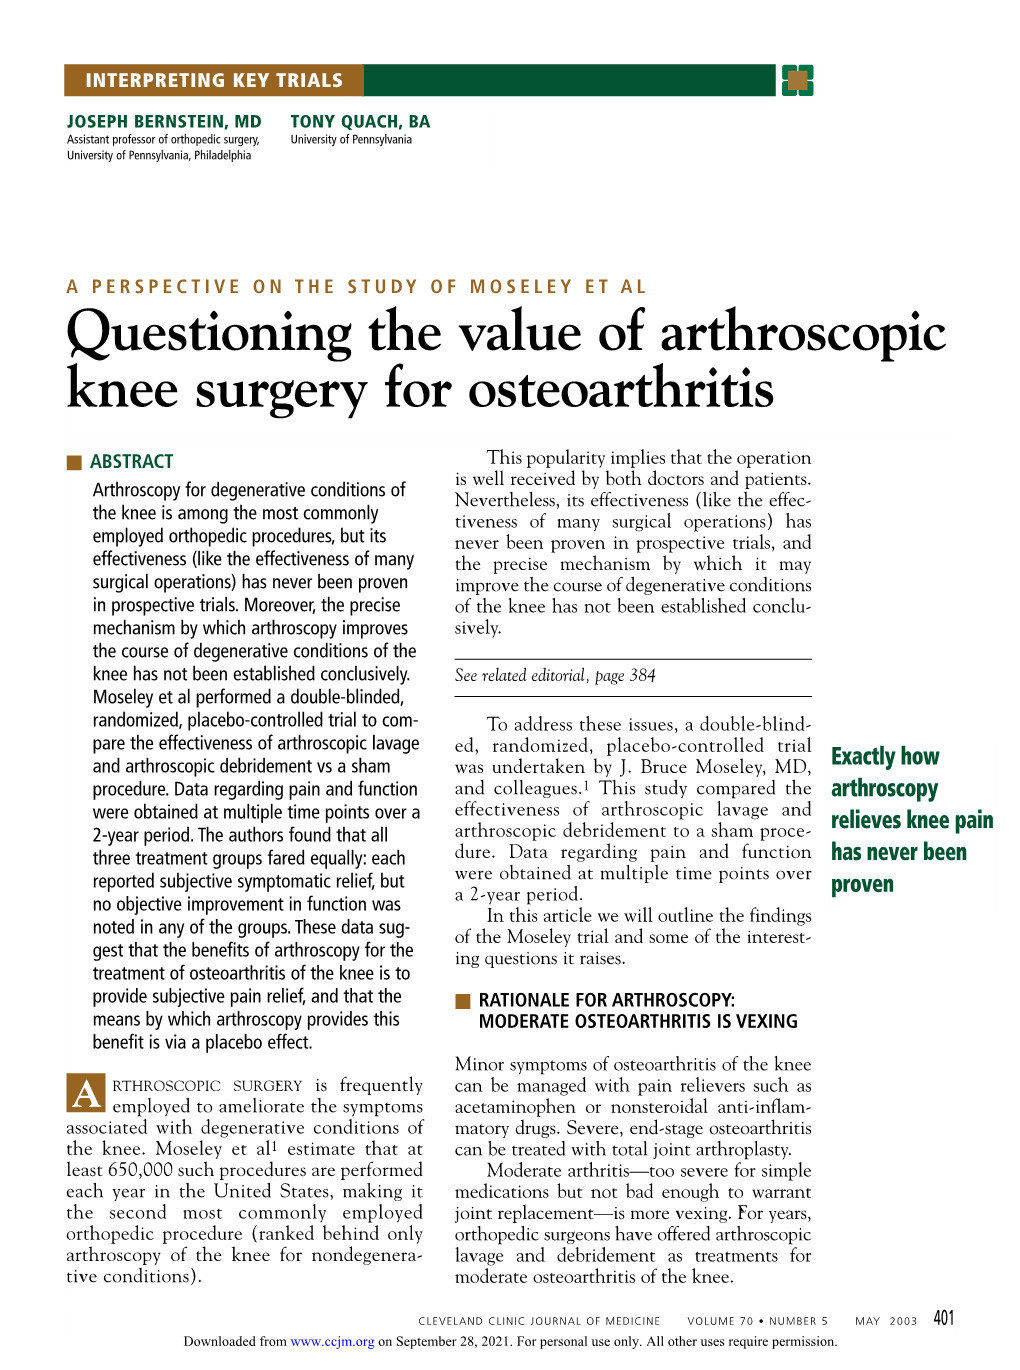 Questioning the Value of Arthroscopic Knee Surgery for Osteoarthritis